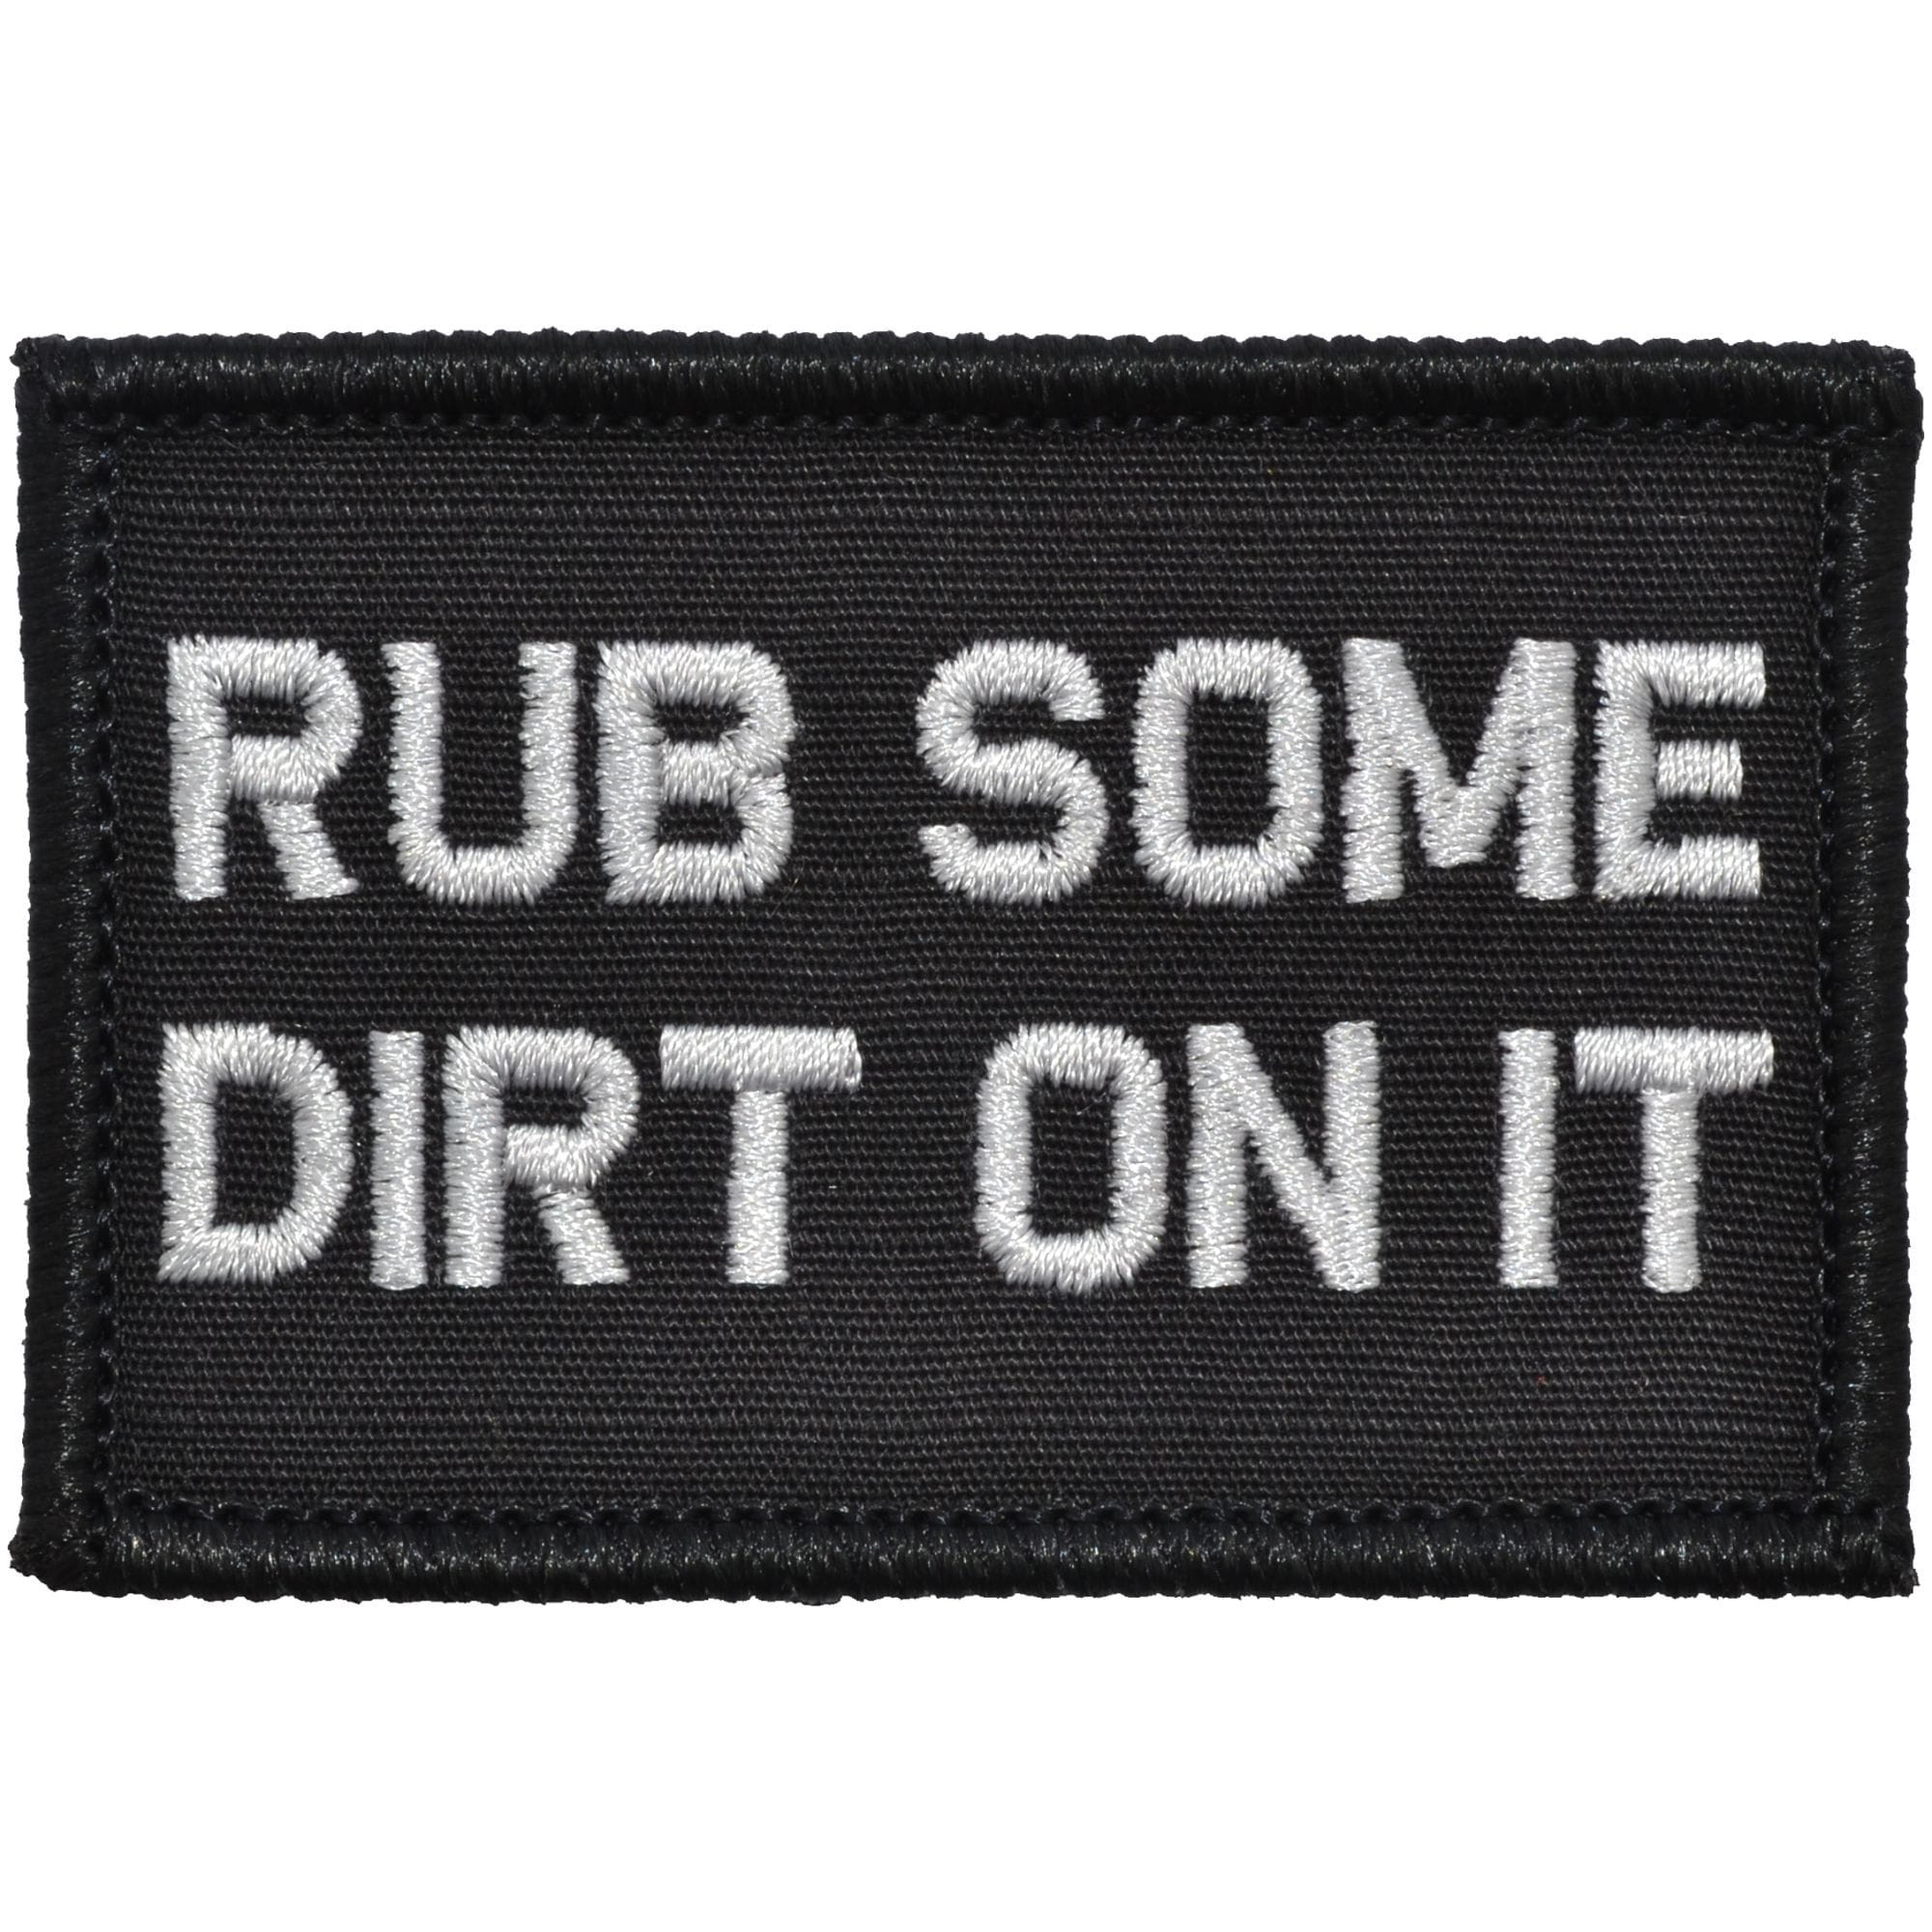 Rub Some Dirt On It - 2x3 Patch  Funny patches, Velcro patches, Tactical  patches